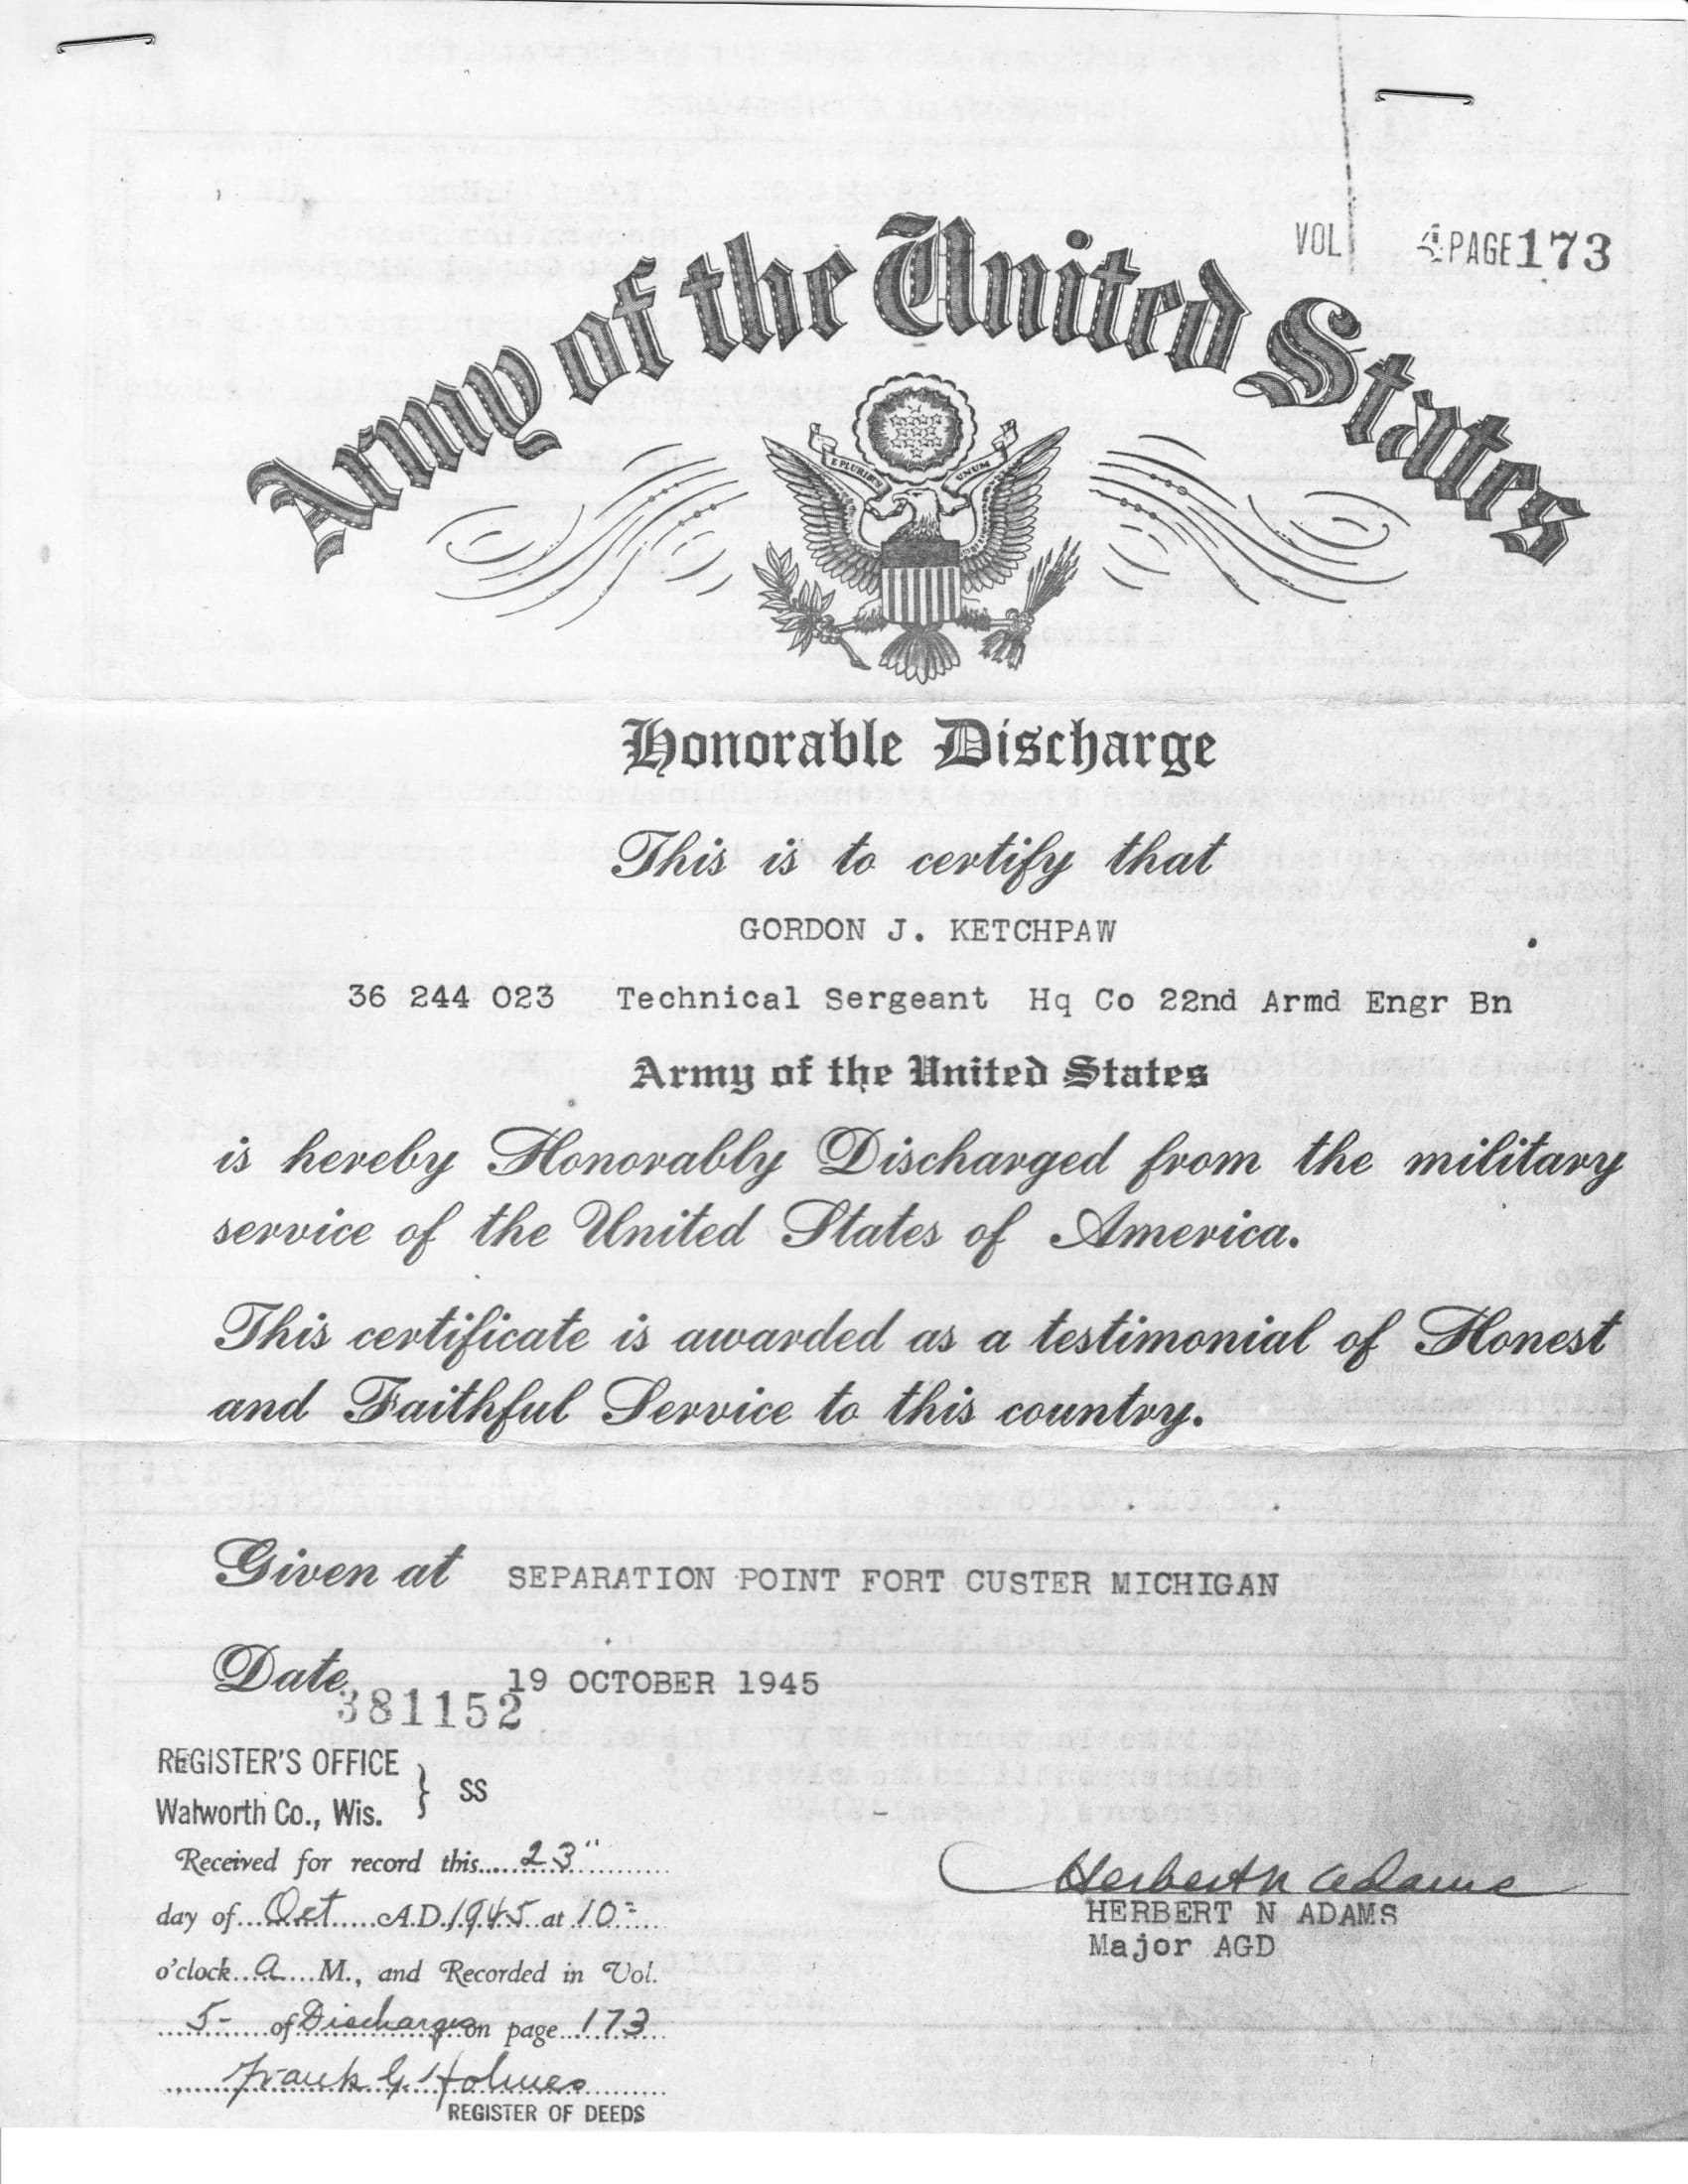 Honorable Discharge Papers